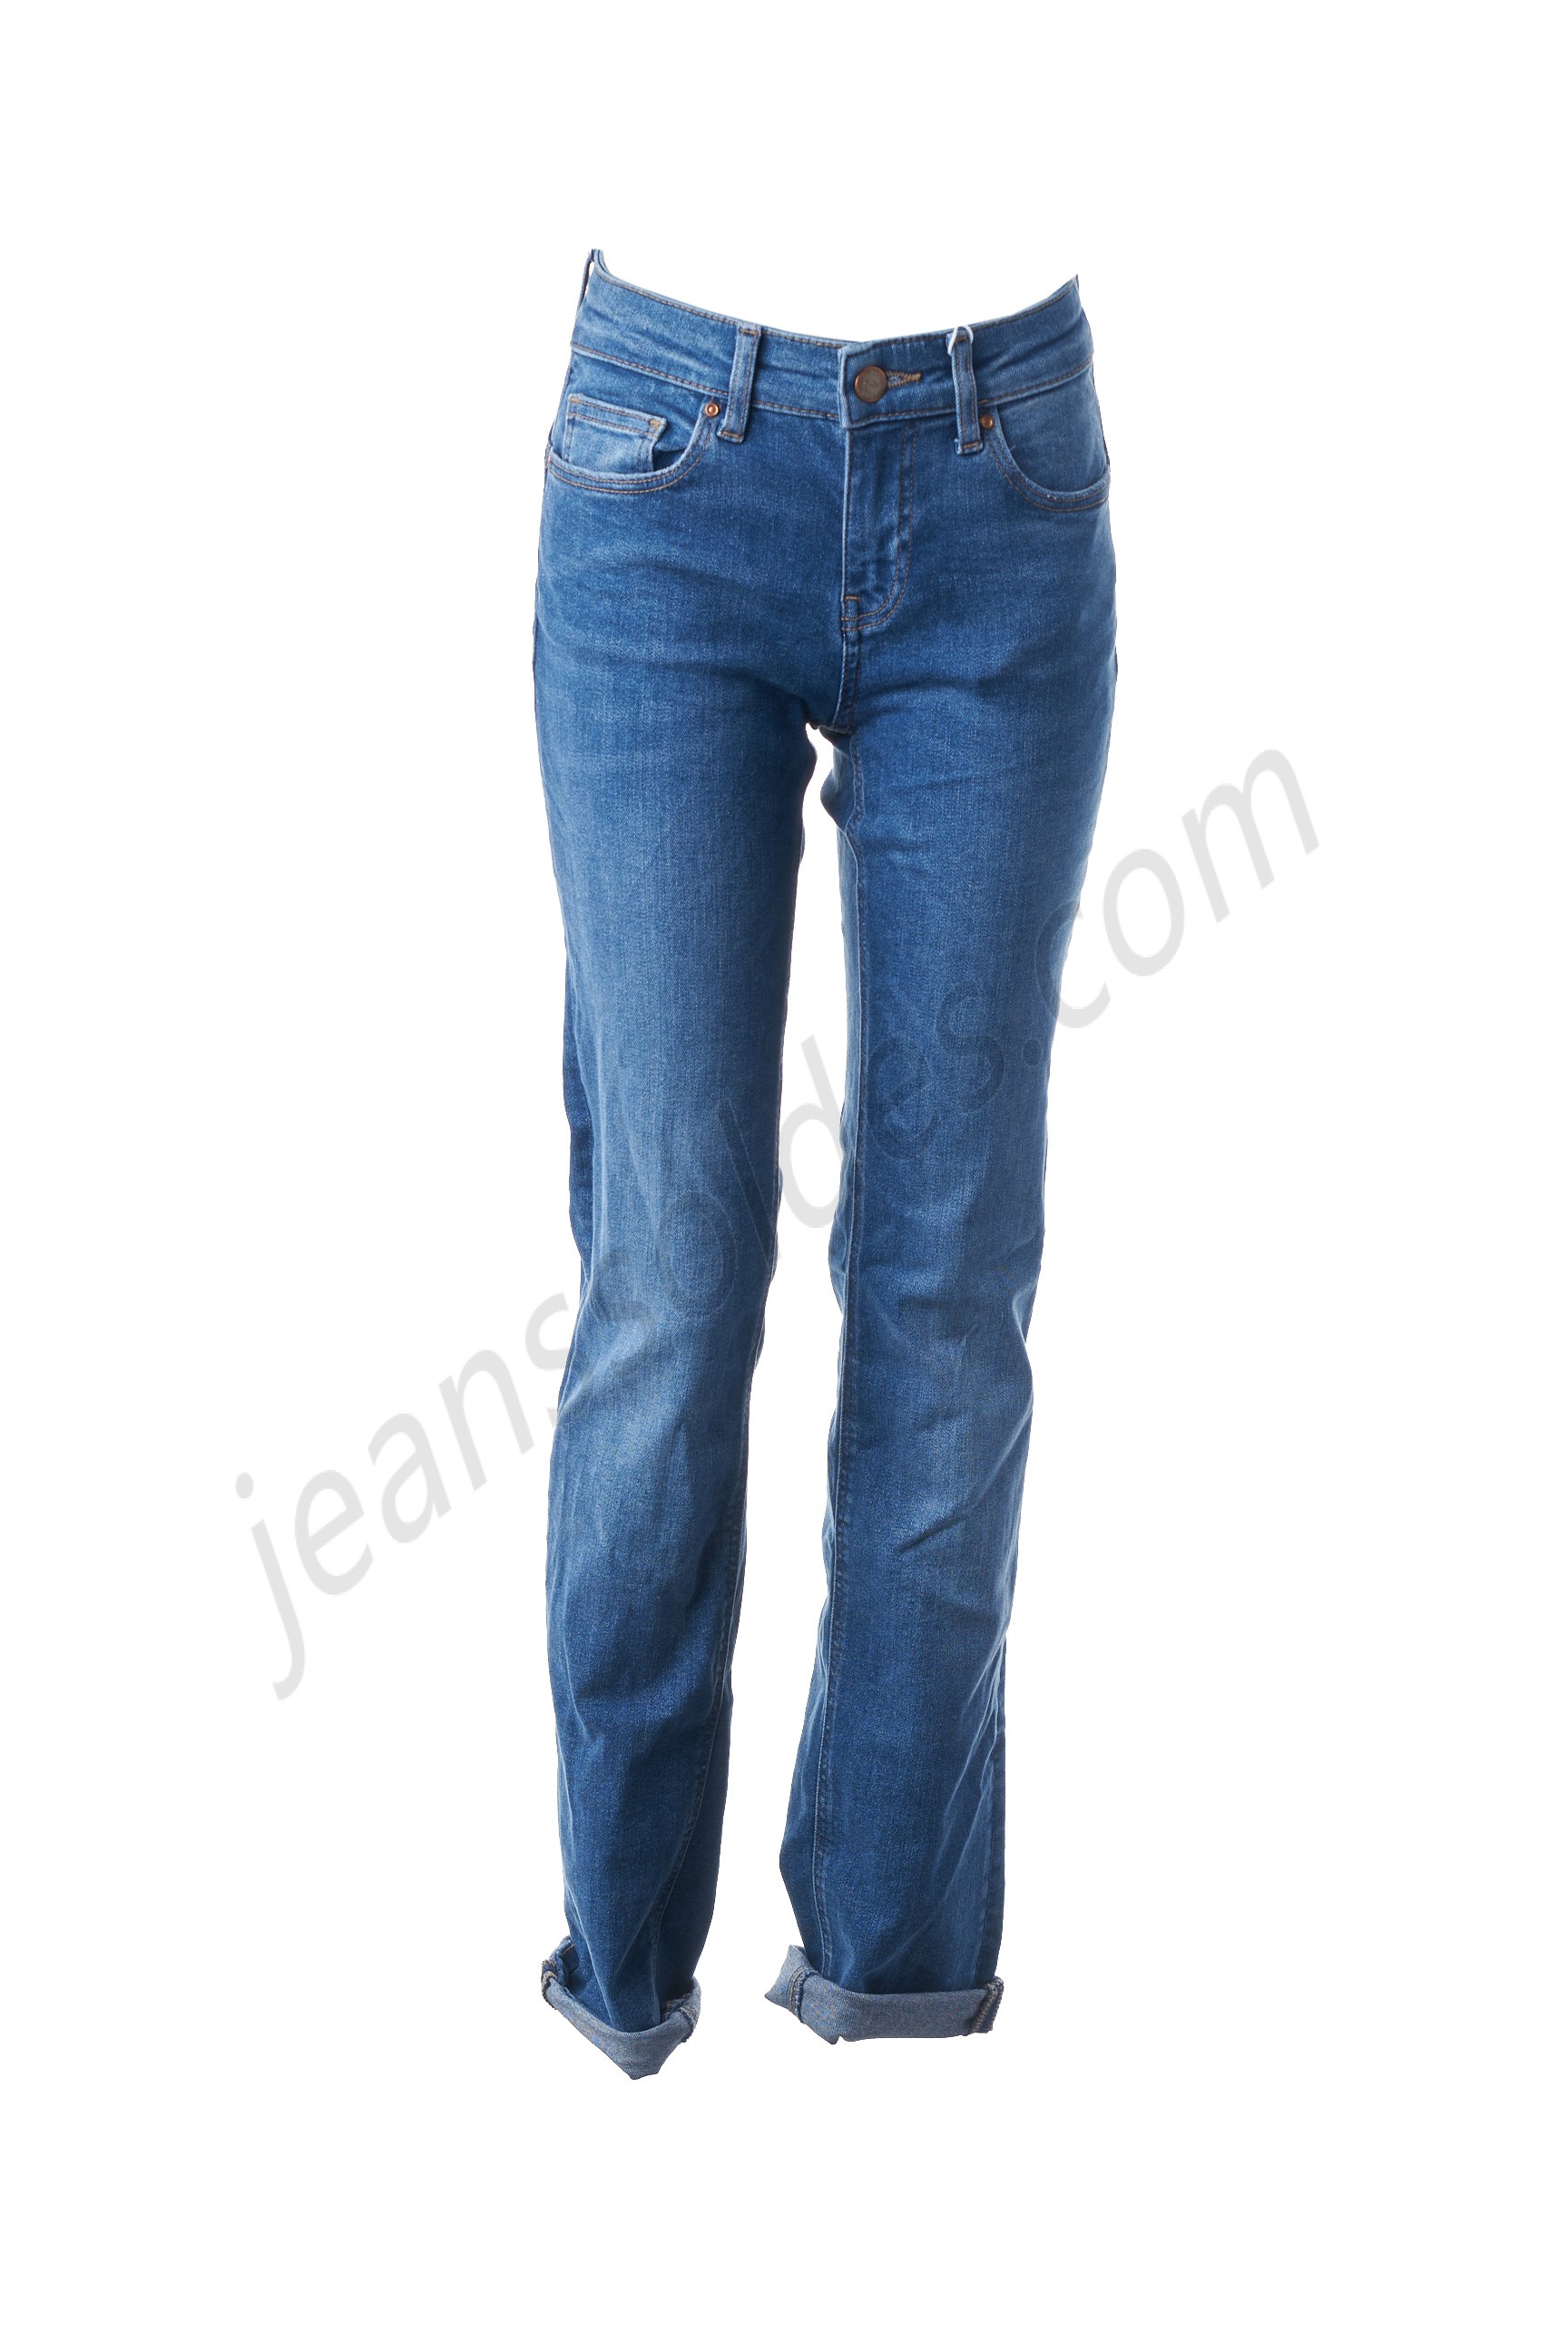 only-Jeans coupe slim prix d’amis - only-Jeans coupe slim prix d’amis